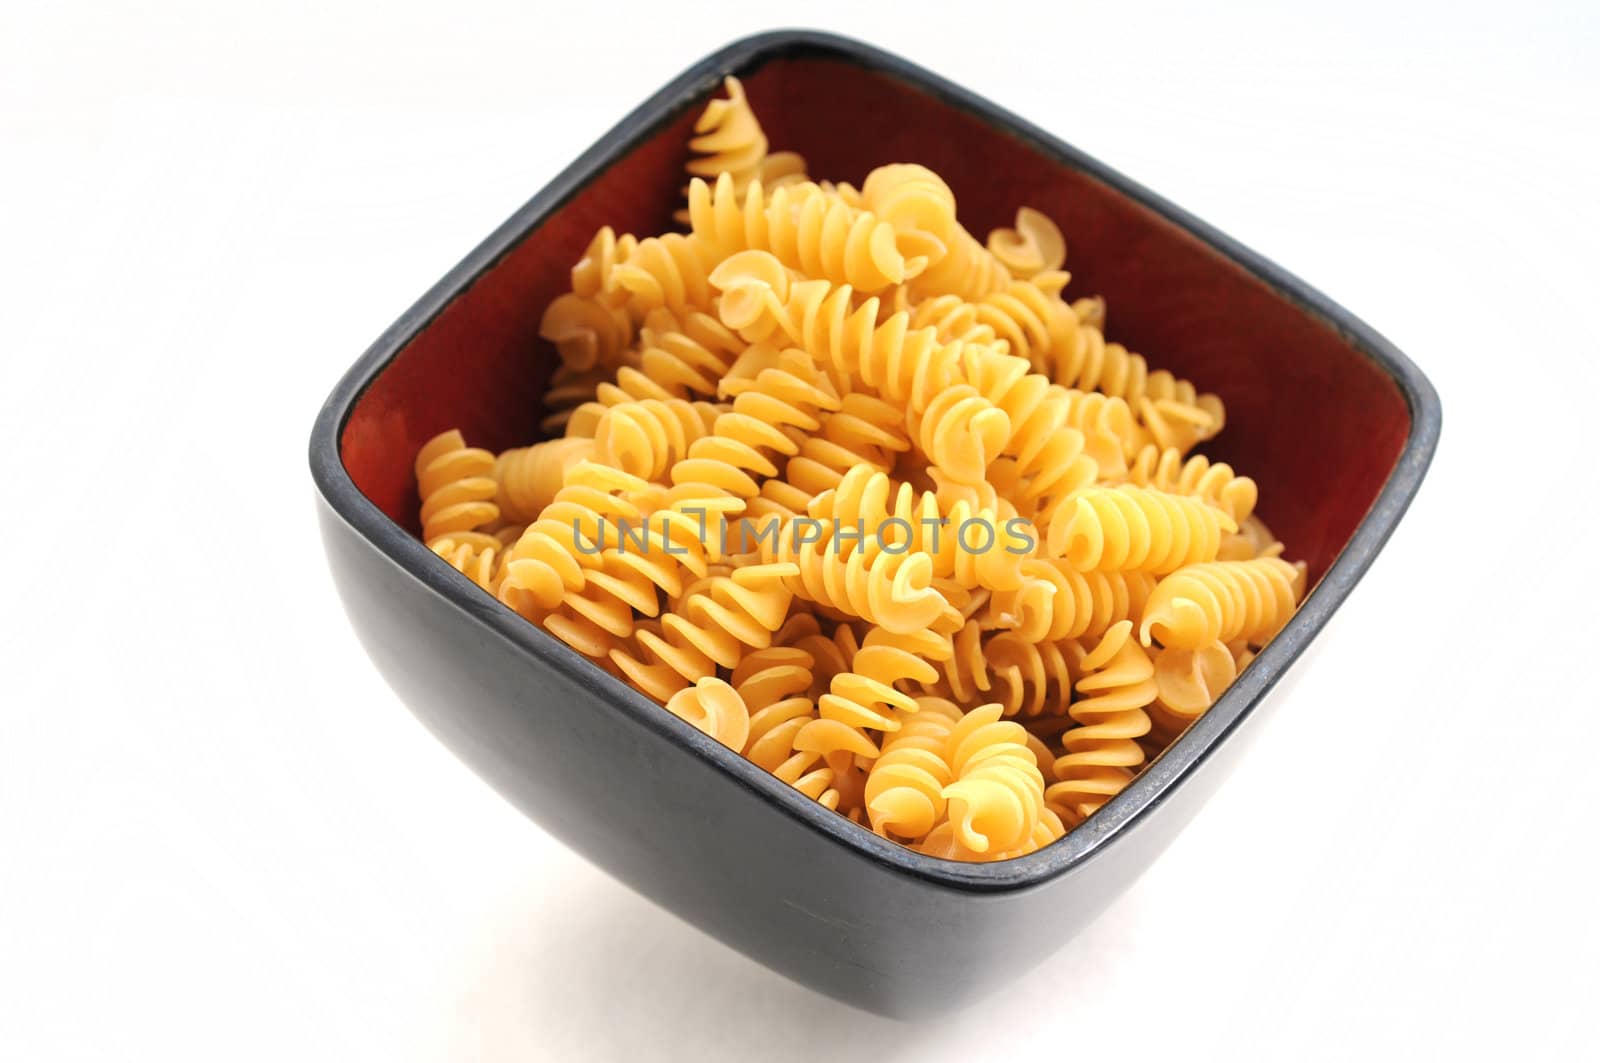 Rotelli pasta in red bowl on white background